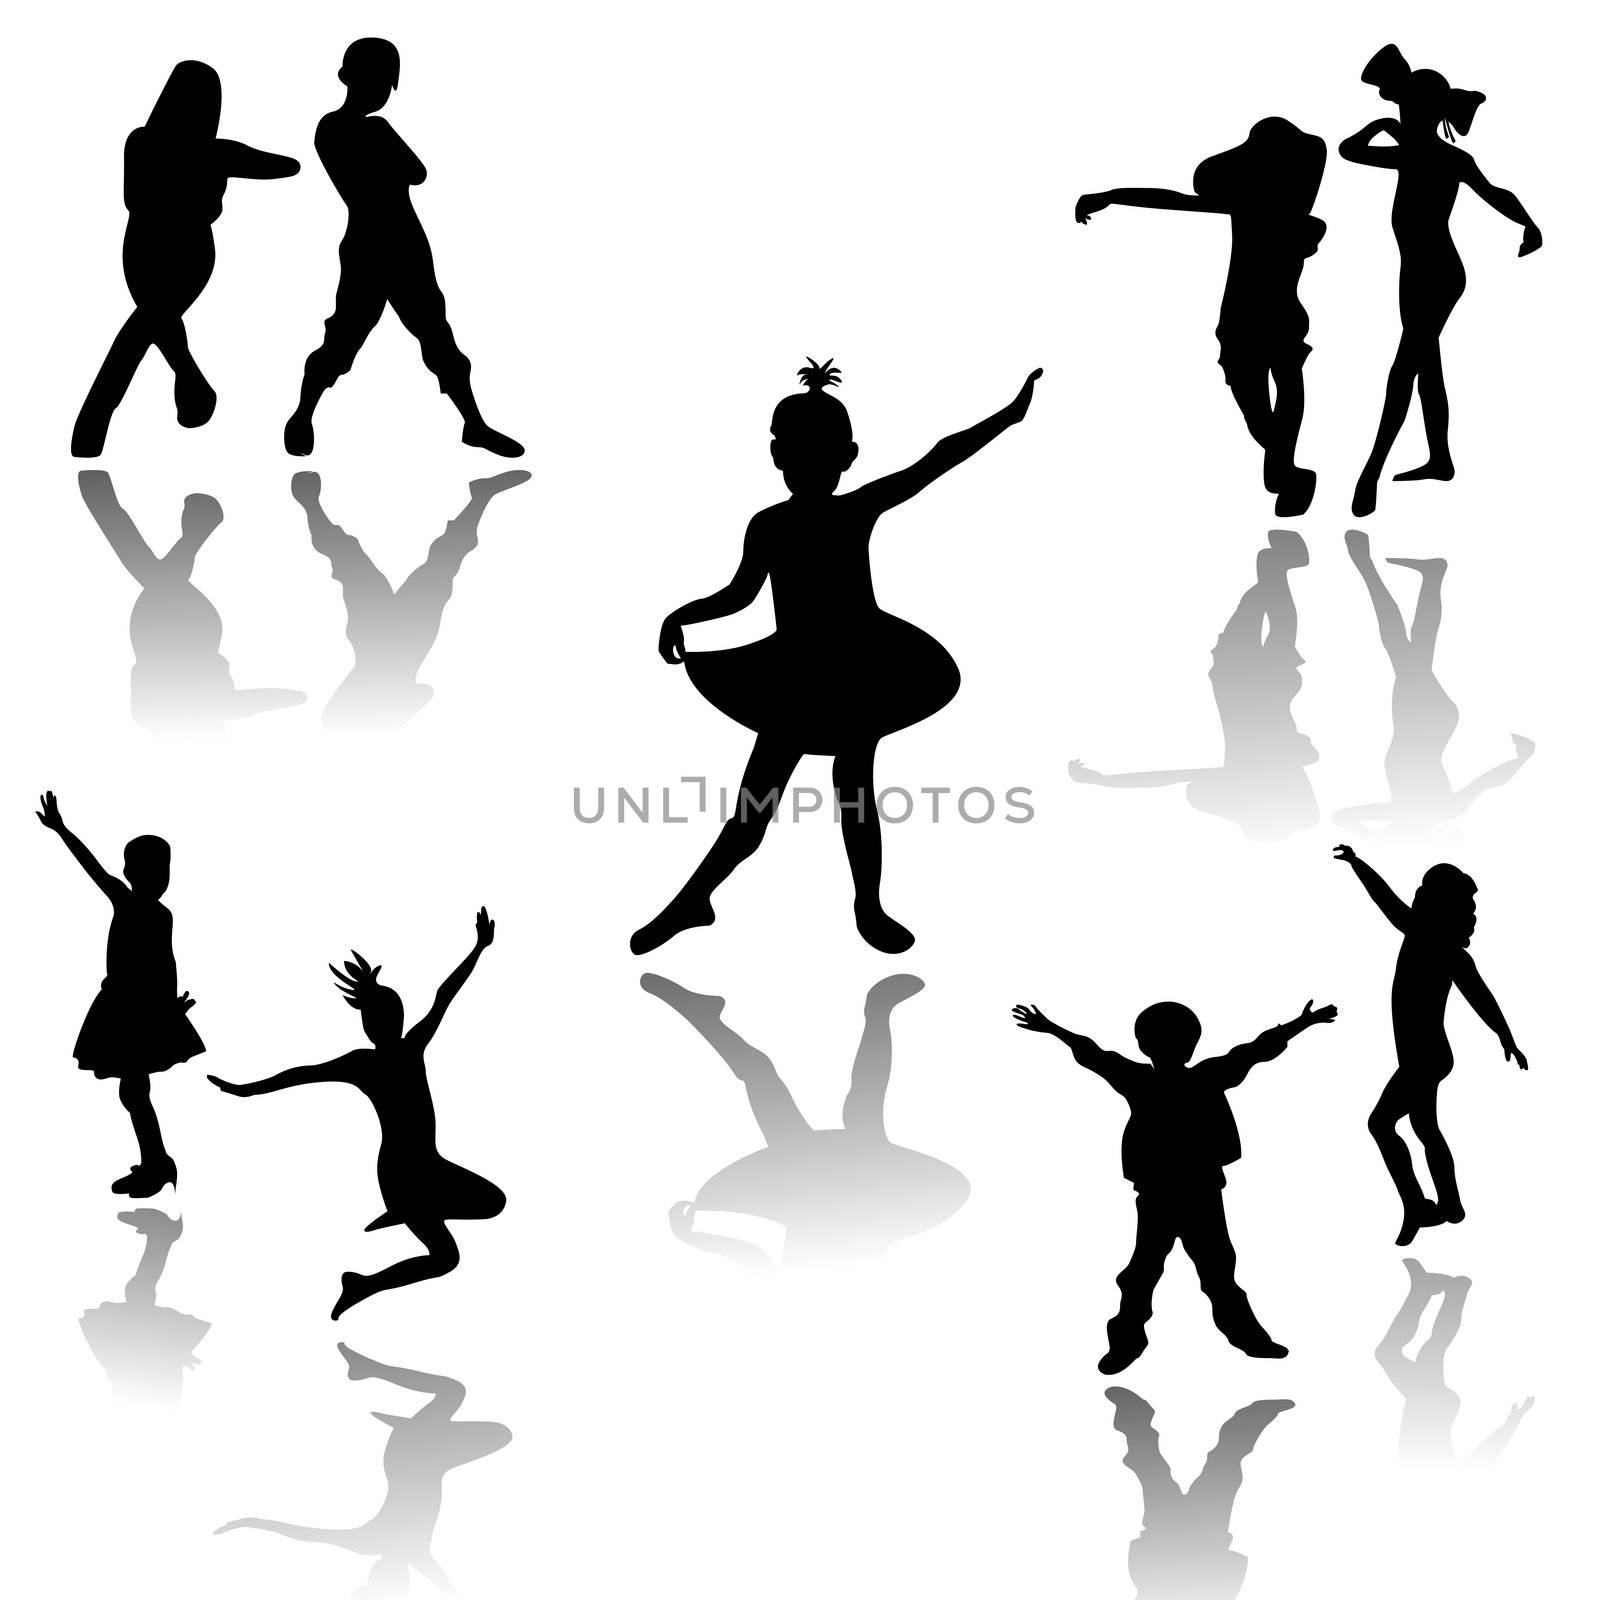 Silhouettes of children at dance